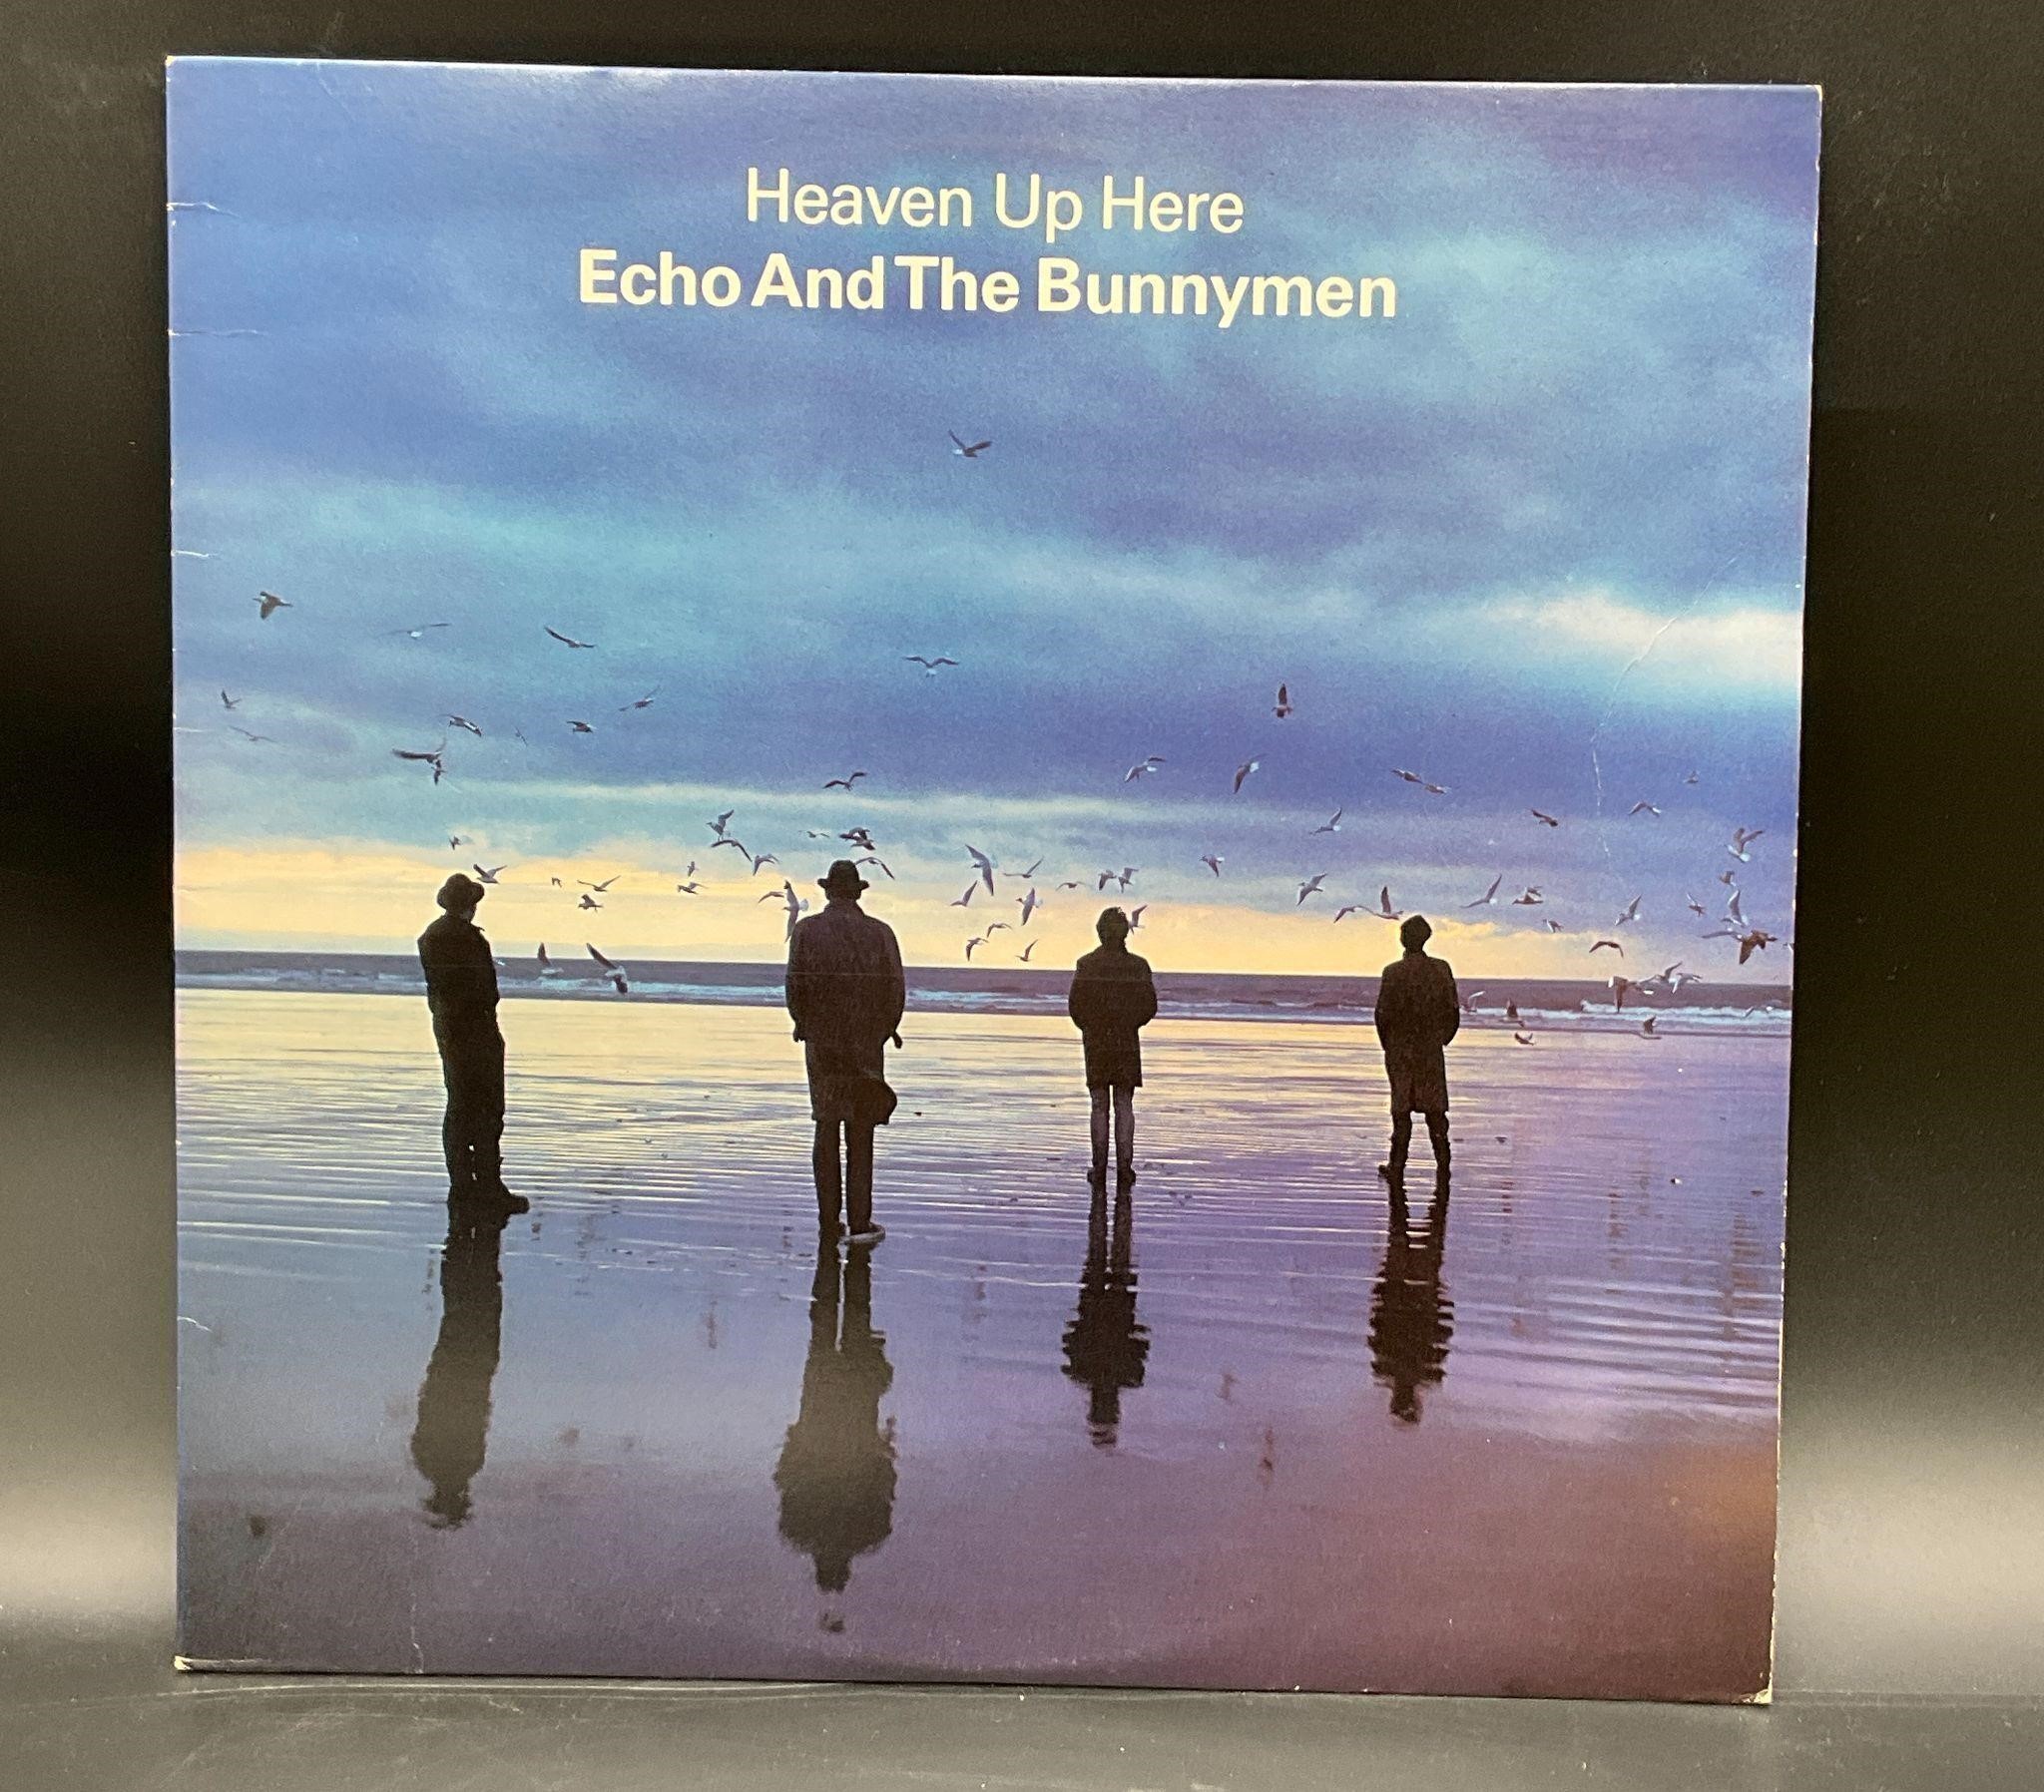 1981 Echo & The Bunnymen "Heaven Up Here" LP